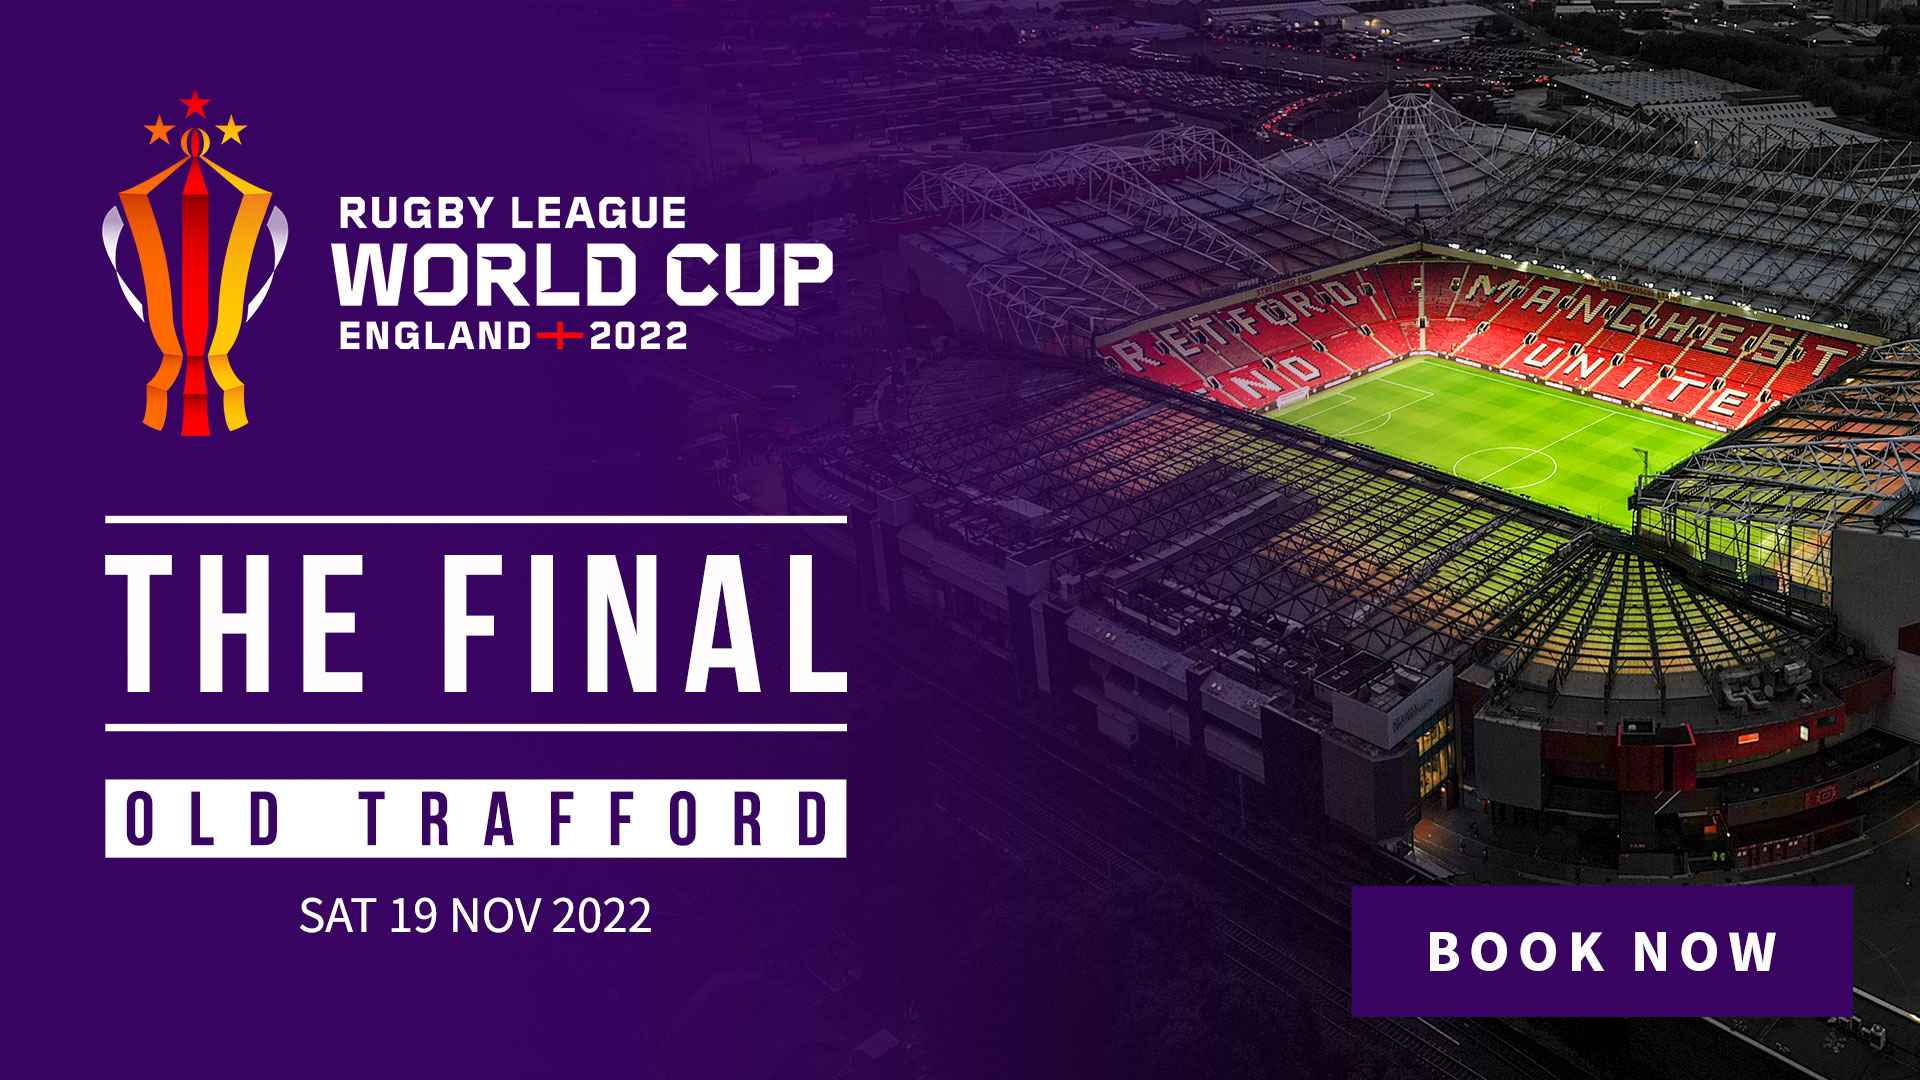 Rugby League World Cup tickets are still on sale for Old Trafford fixtures Manchester United